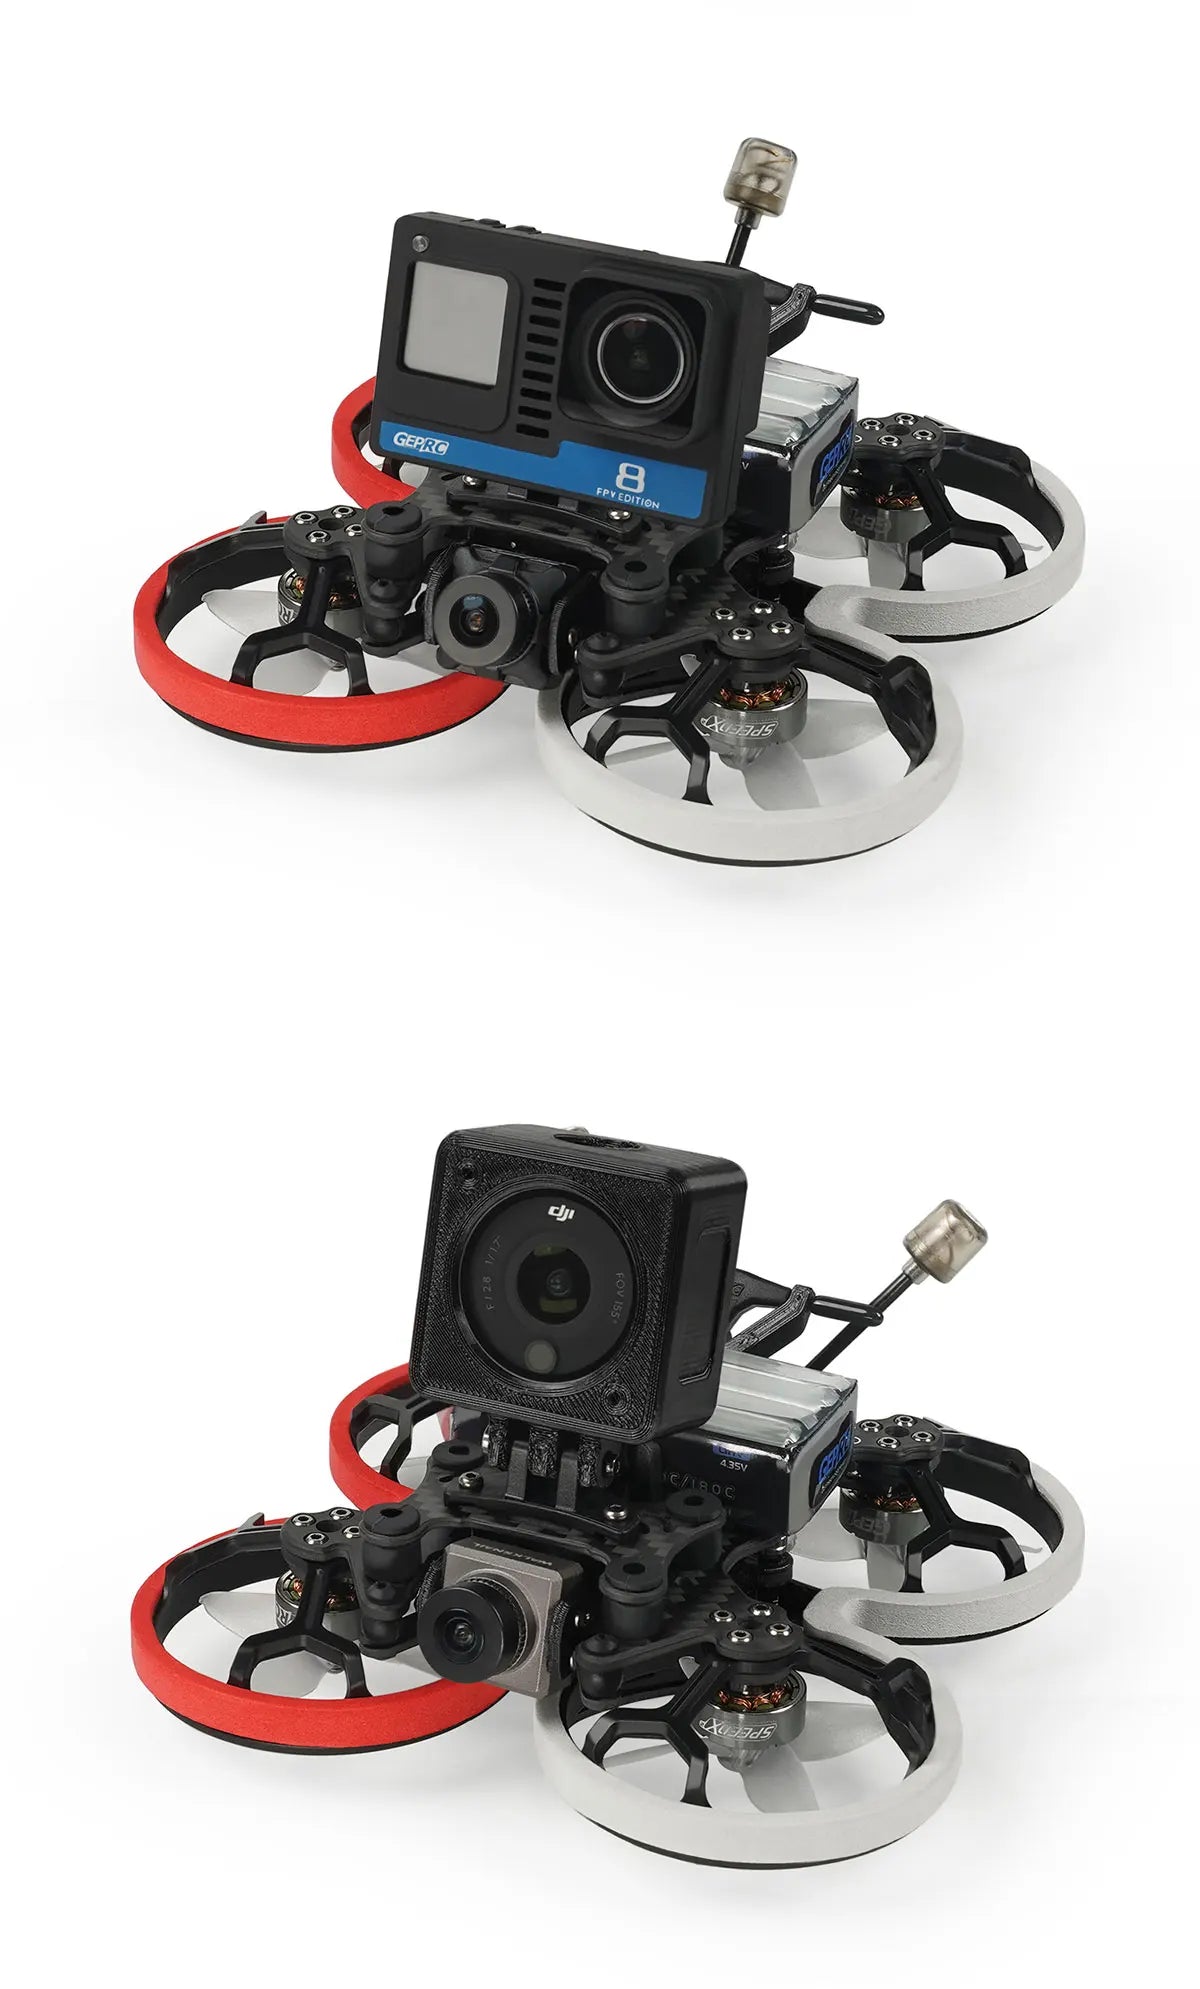 GEPRC Cinelog20 HD Wasp FPV Drone, Using the one-piece injection molding camera mount, you can quickly mount GEPRC naked